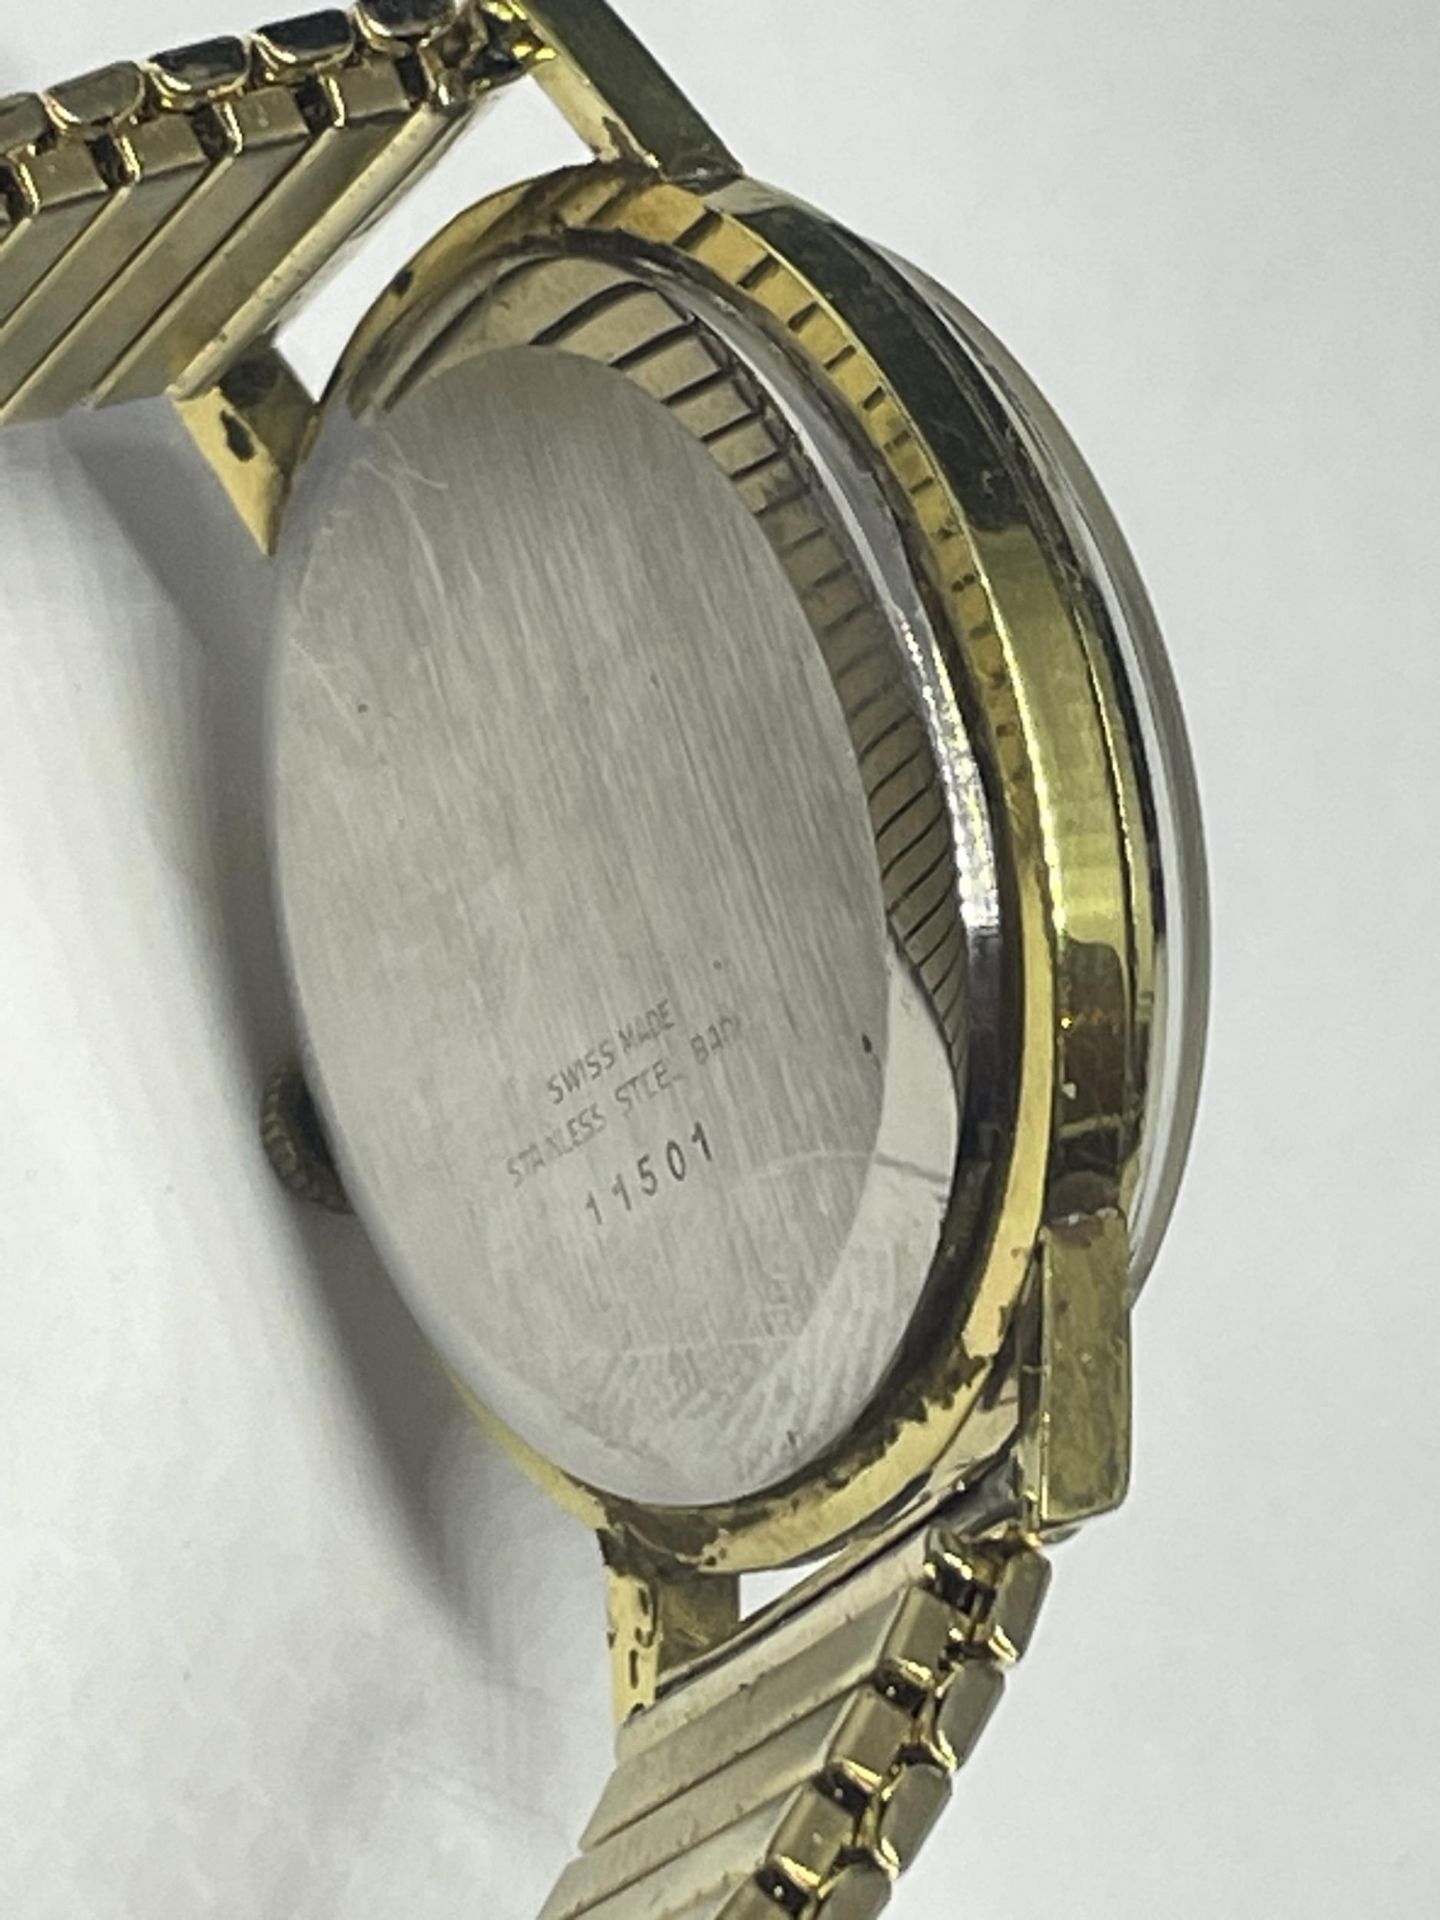 A VINTAGE SELZA GENTS WRIST WATCH, SEEN WORKING BUT NO WARRANTIES GIVEN - Image 3 of 4